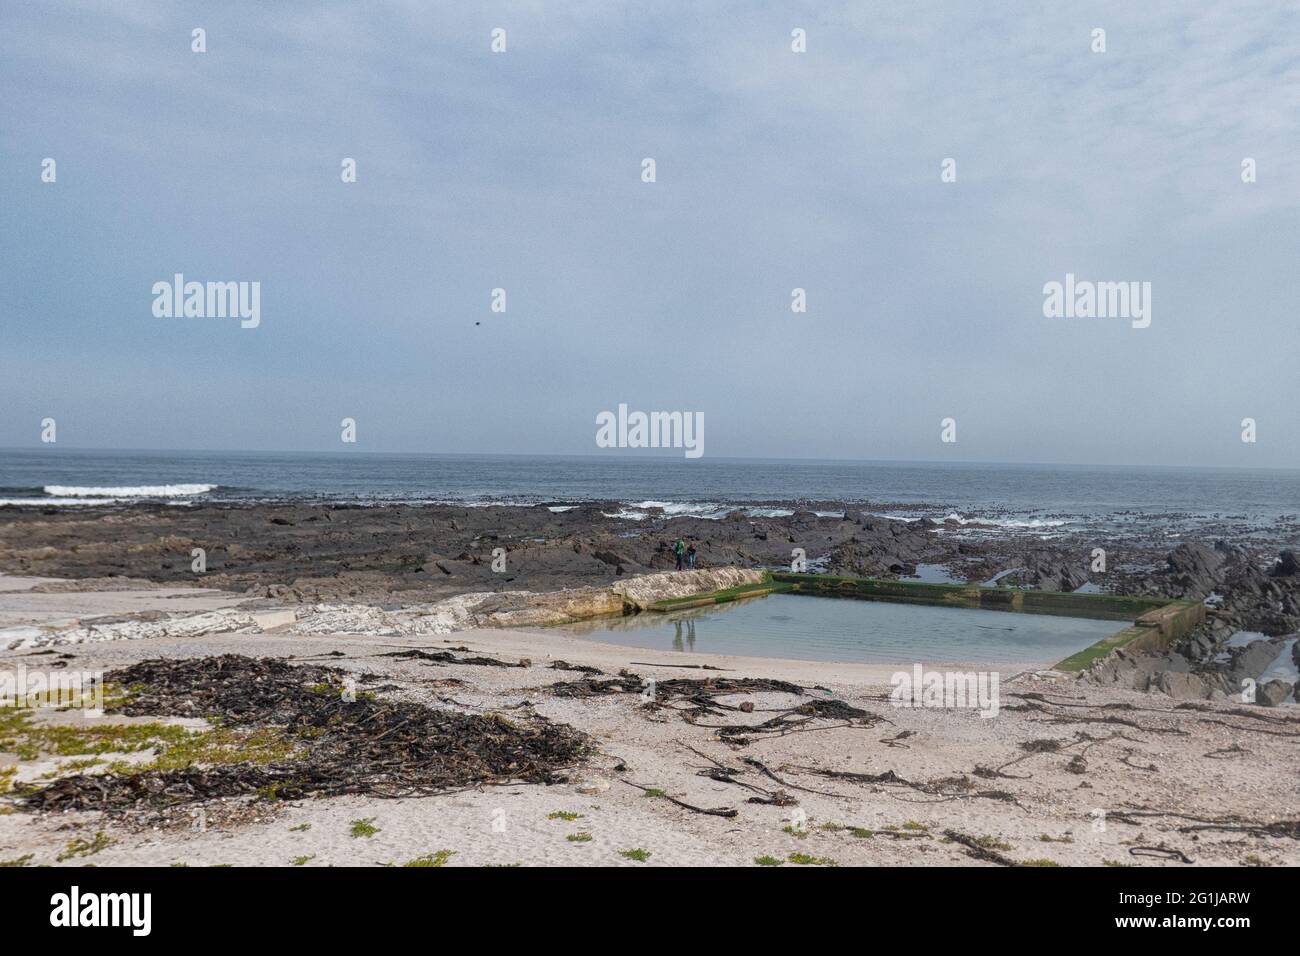 Milton Pool - Natural Seawater Tidal Pool on Beach in Sea Point - Cape Town - South Africa Stock Photo